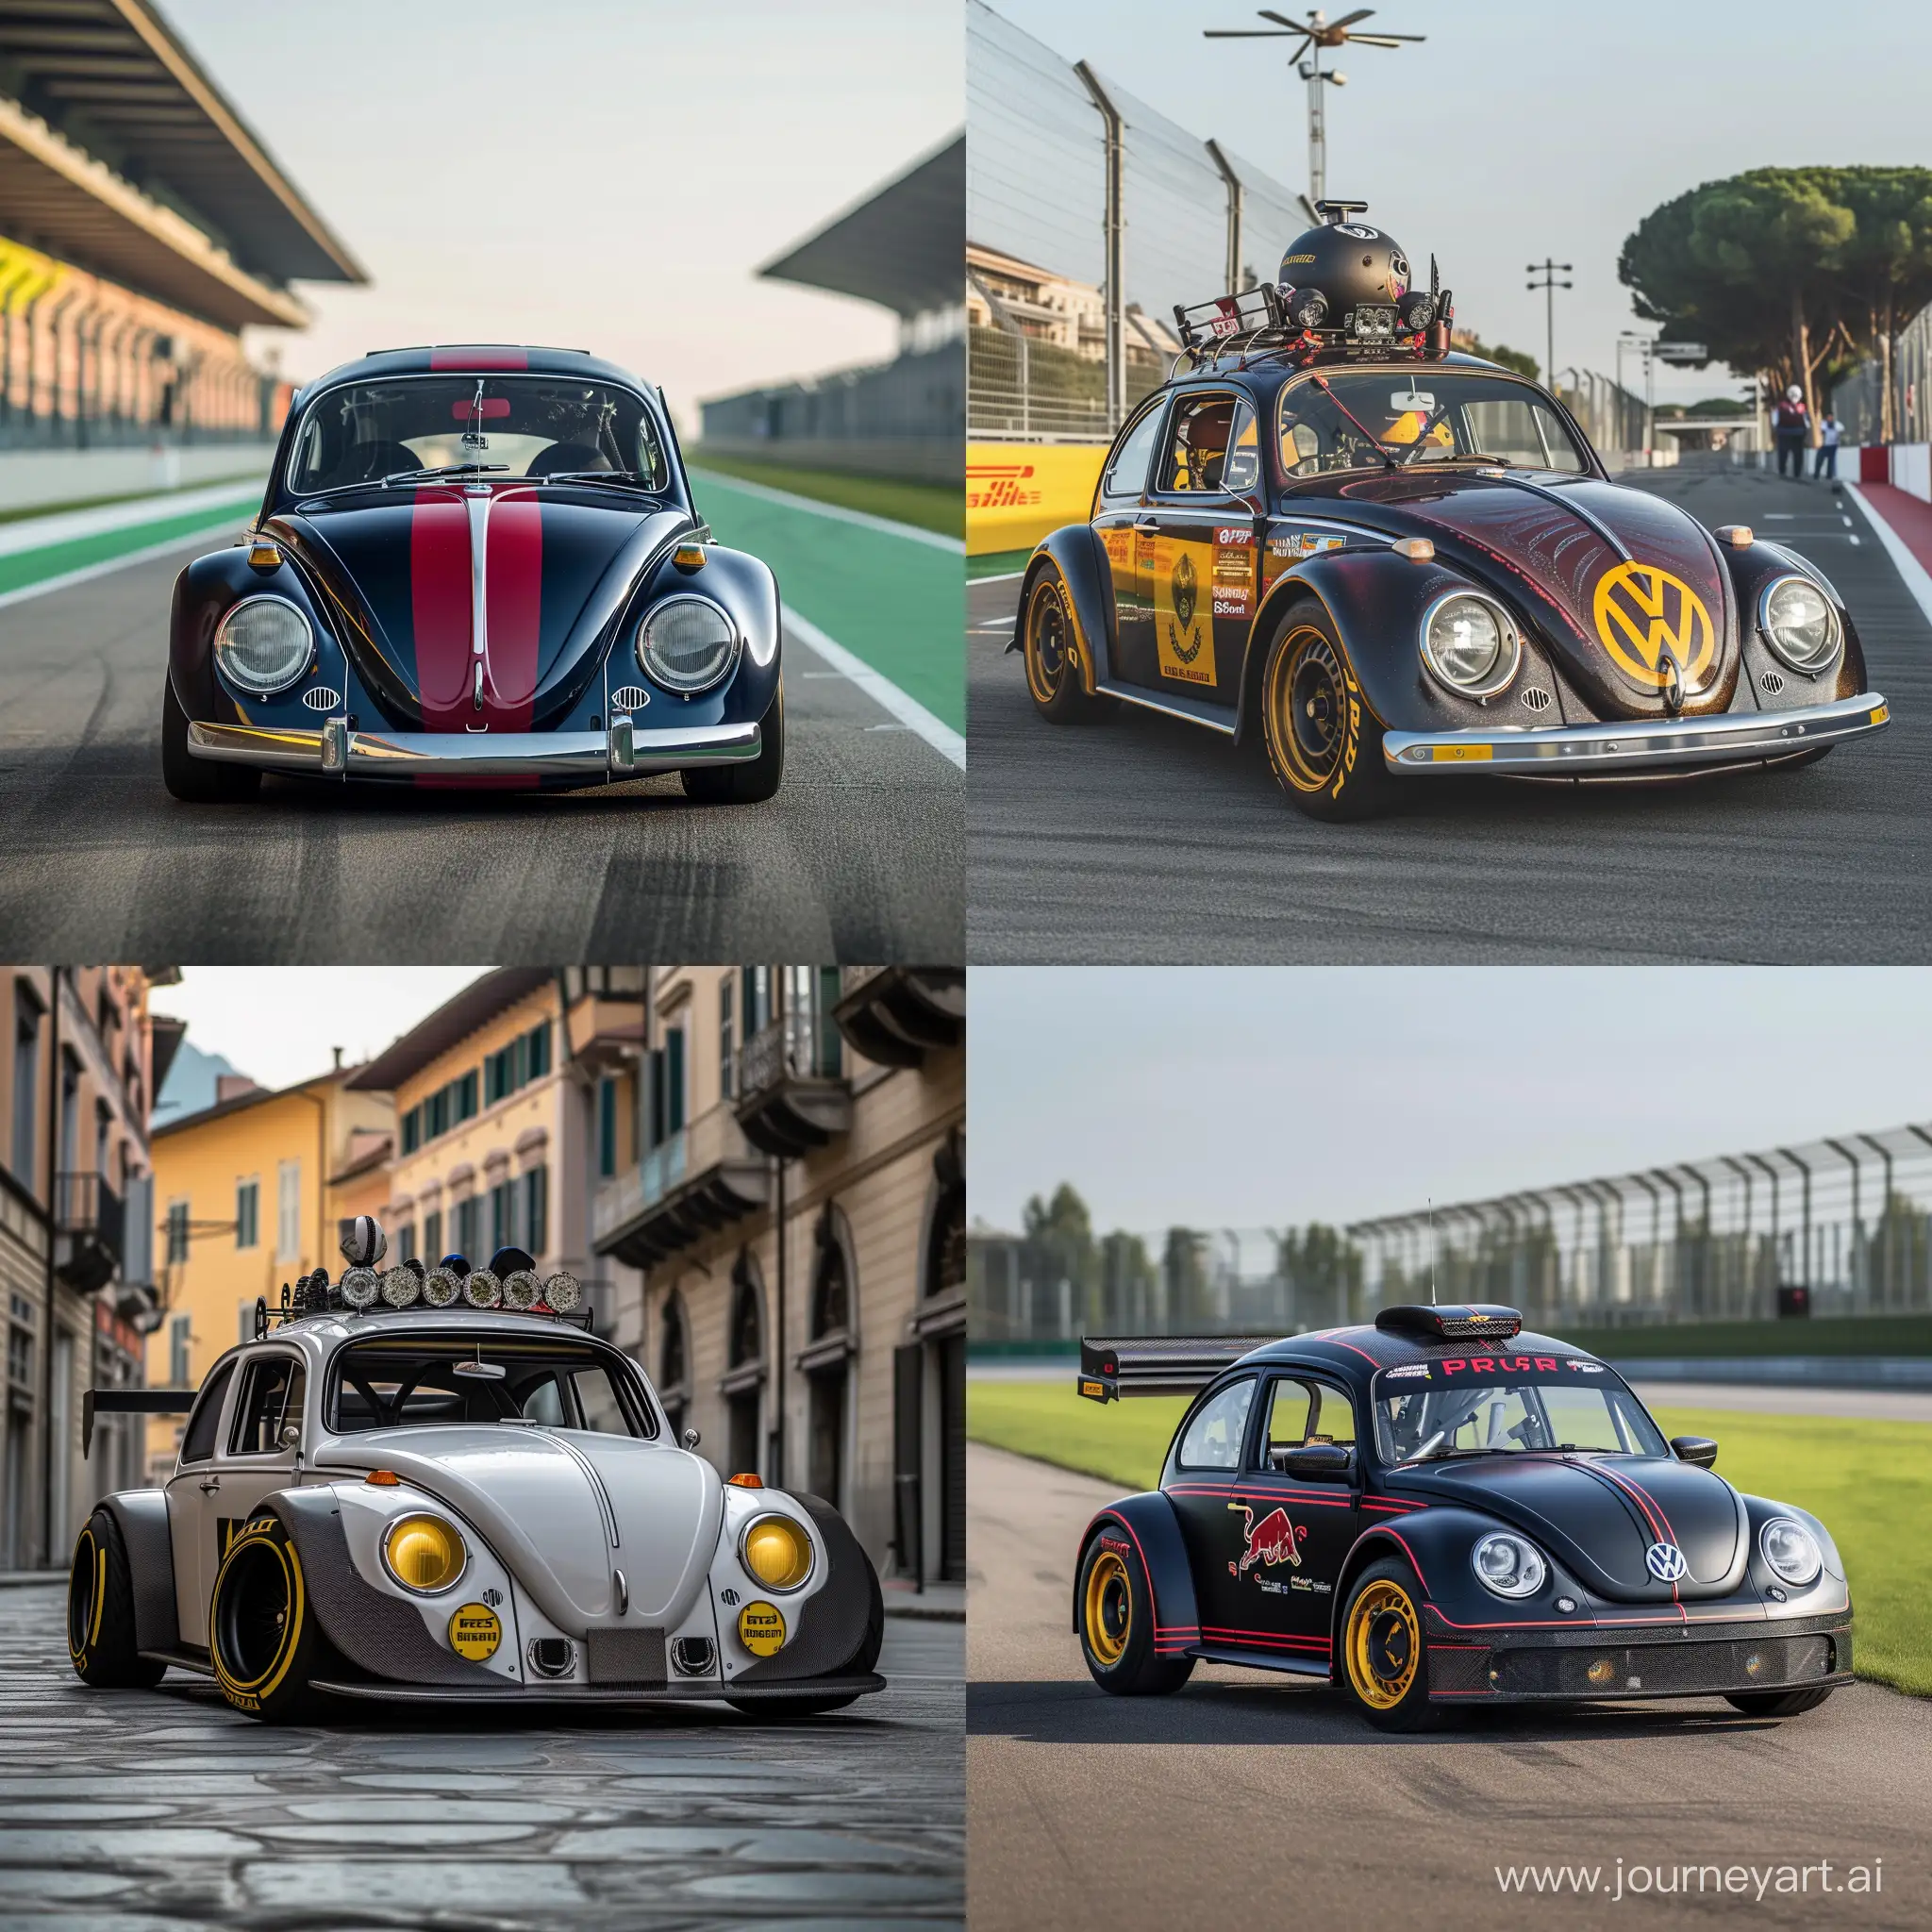 Vintage-VW-Beetle-with-F1-Equipment-at-Imola-Racetrack